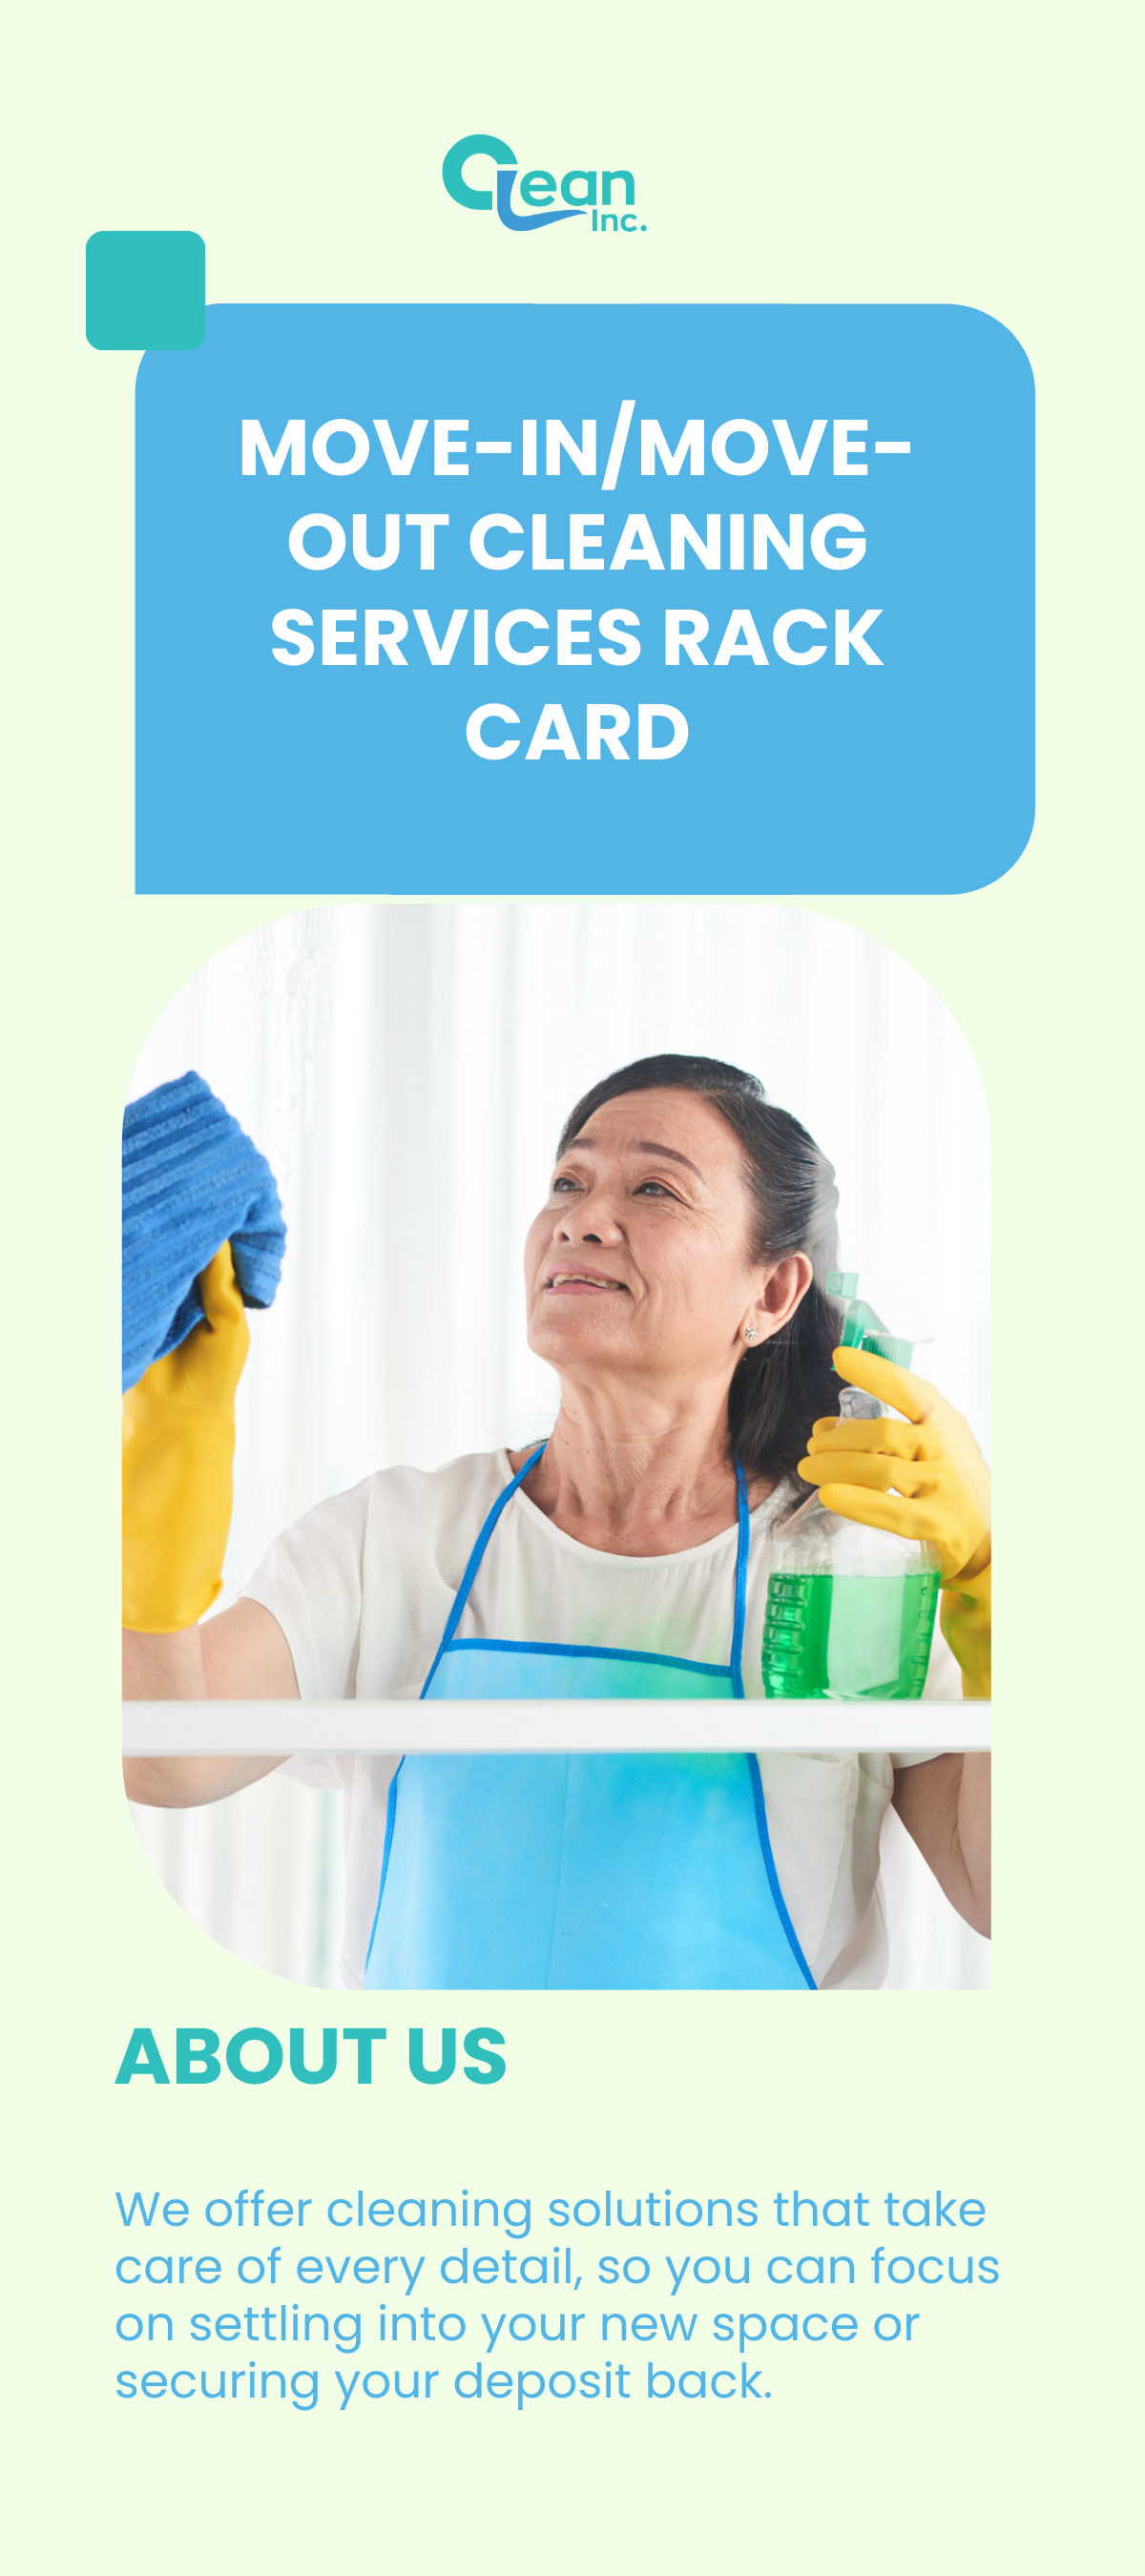 Free Move-In/Move-Out Cleaning Services Rack Card Template